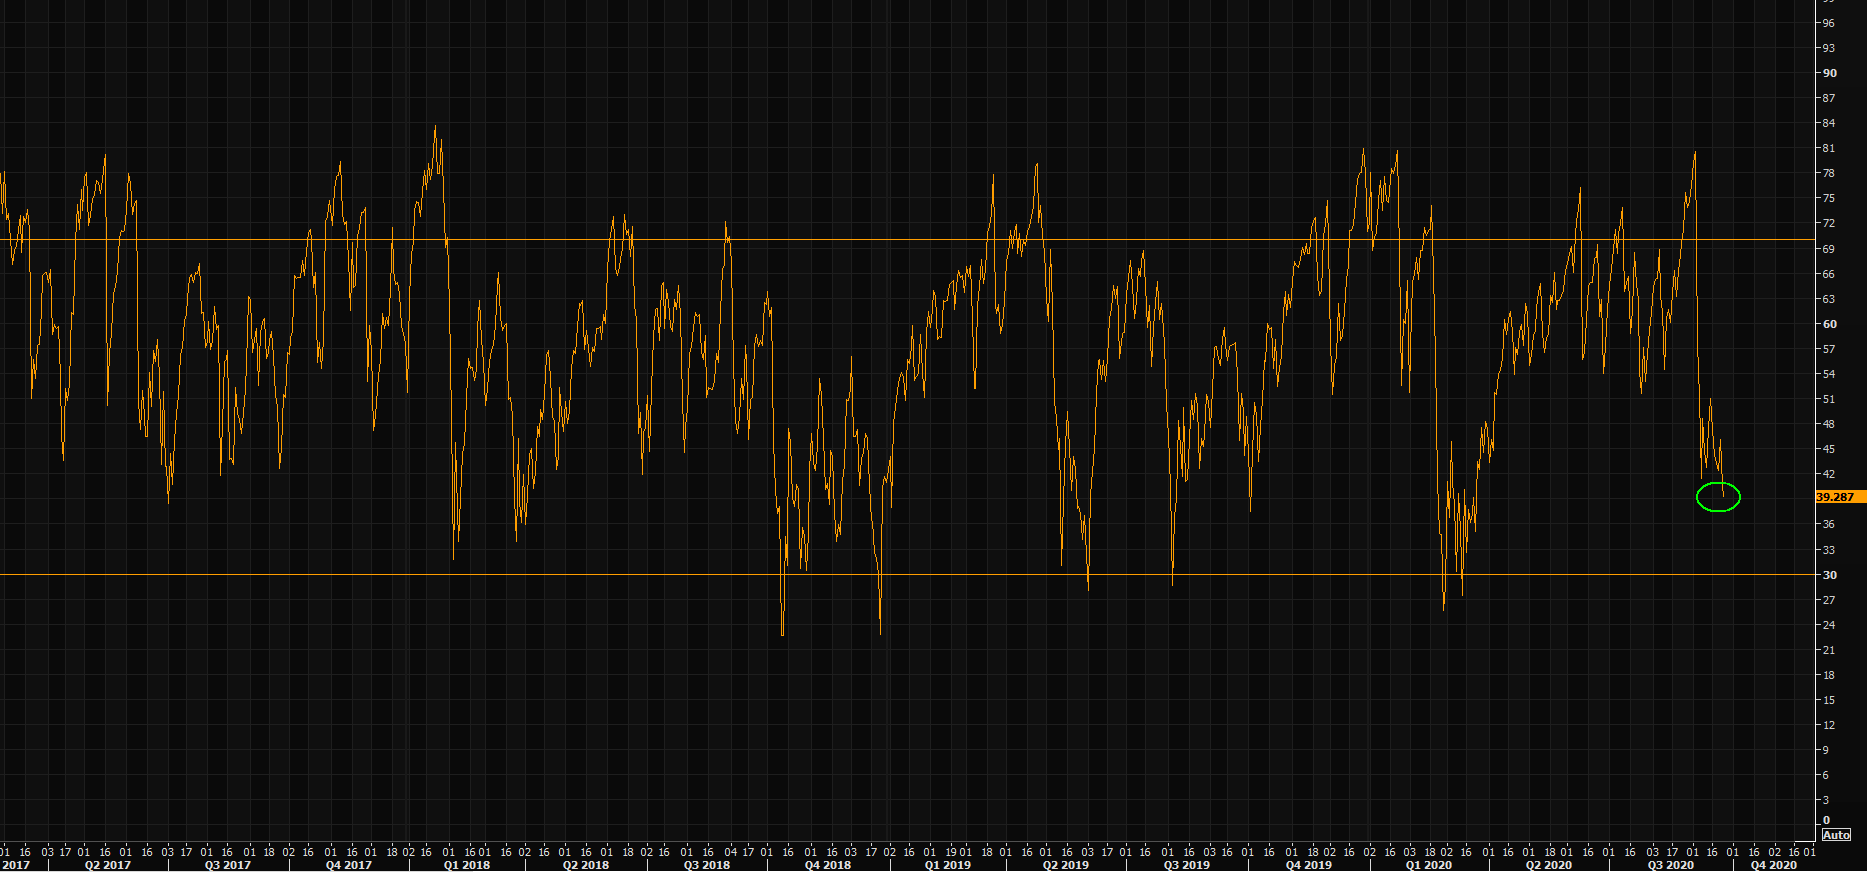 NASDAQ has not been this oversold since late March